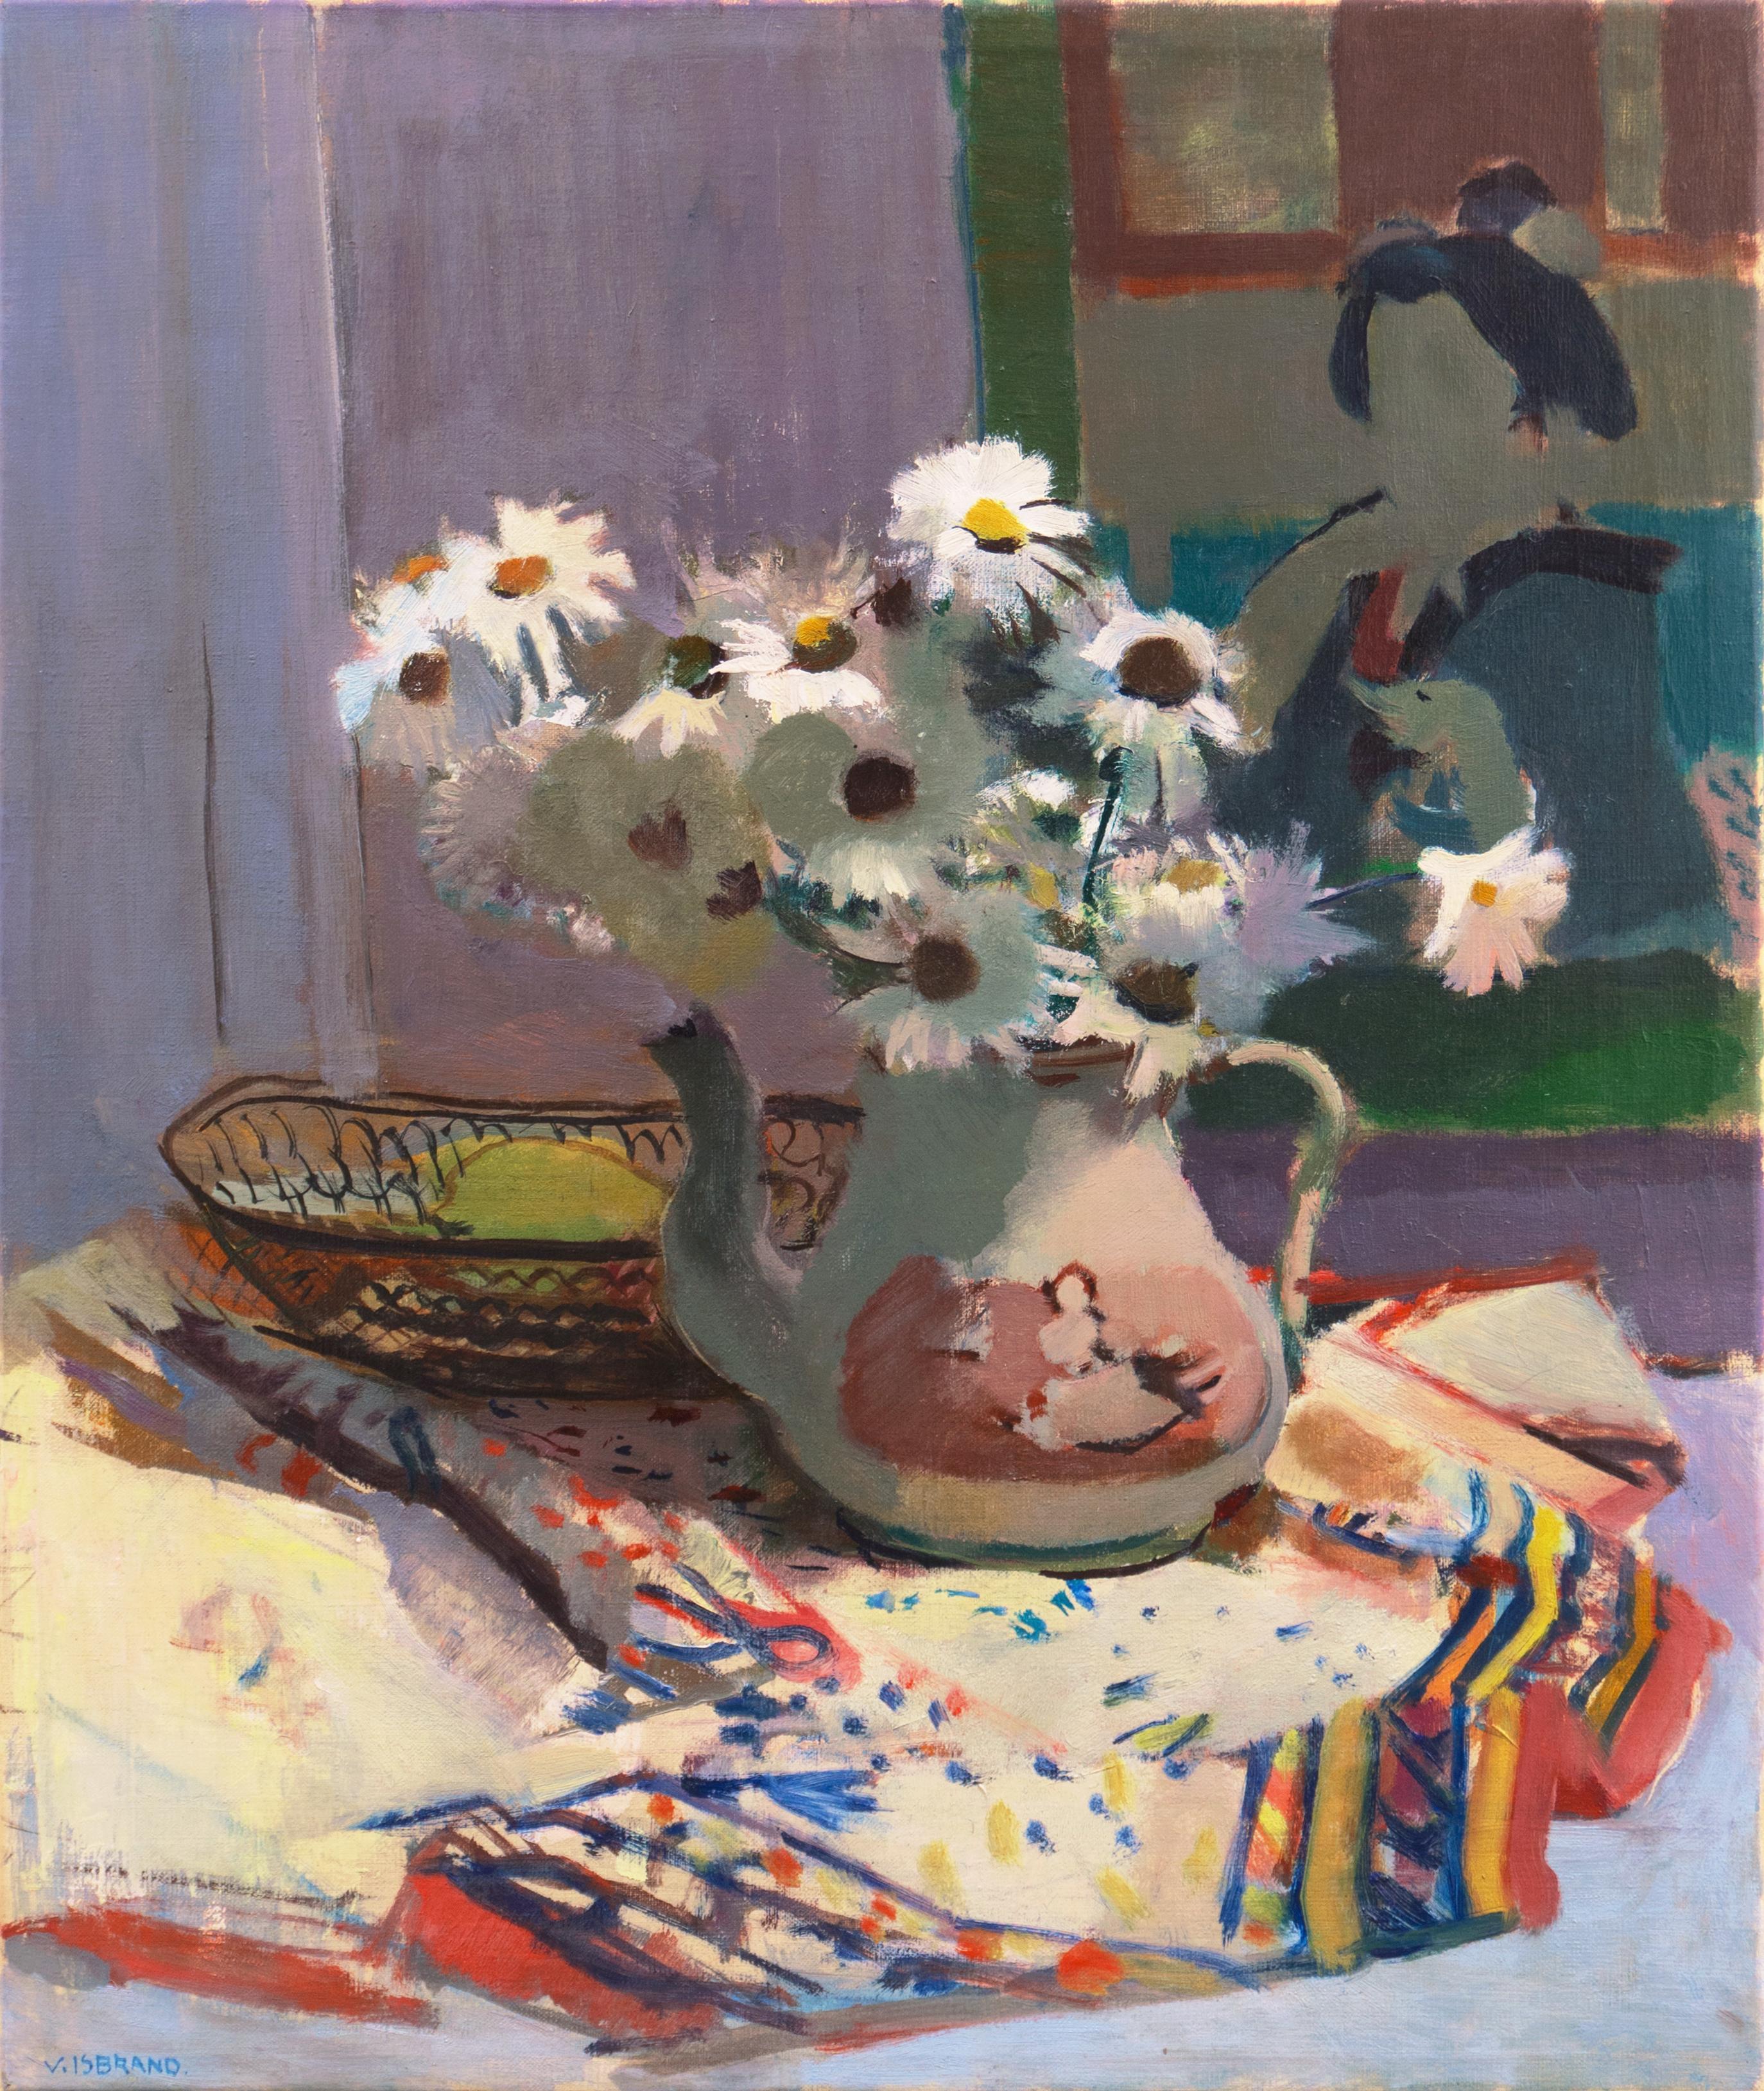 'Daisies with a Japanese Print', Paris, Academie Chaumiere, Large oil Still Life